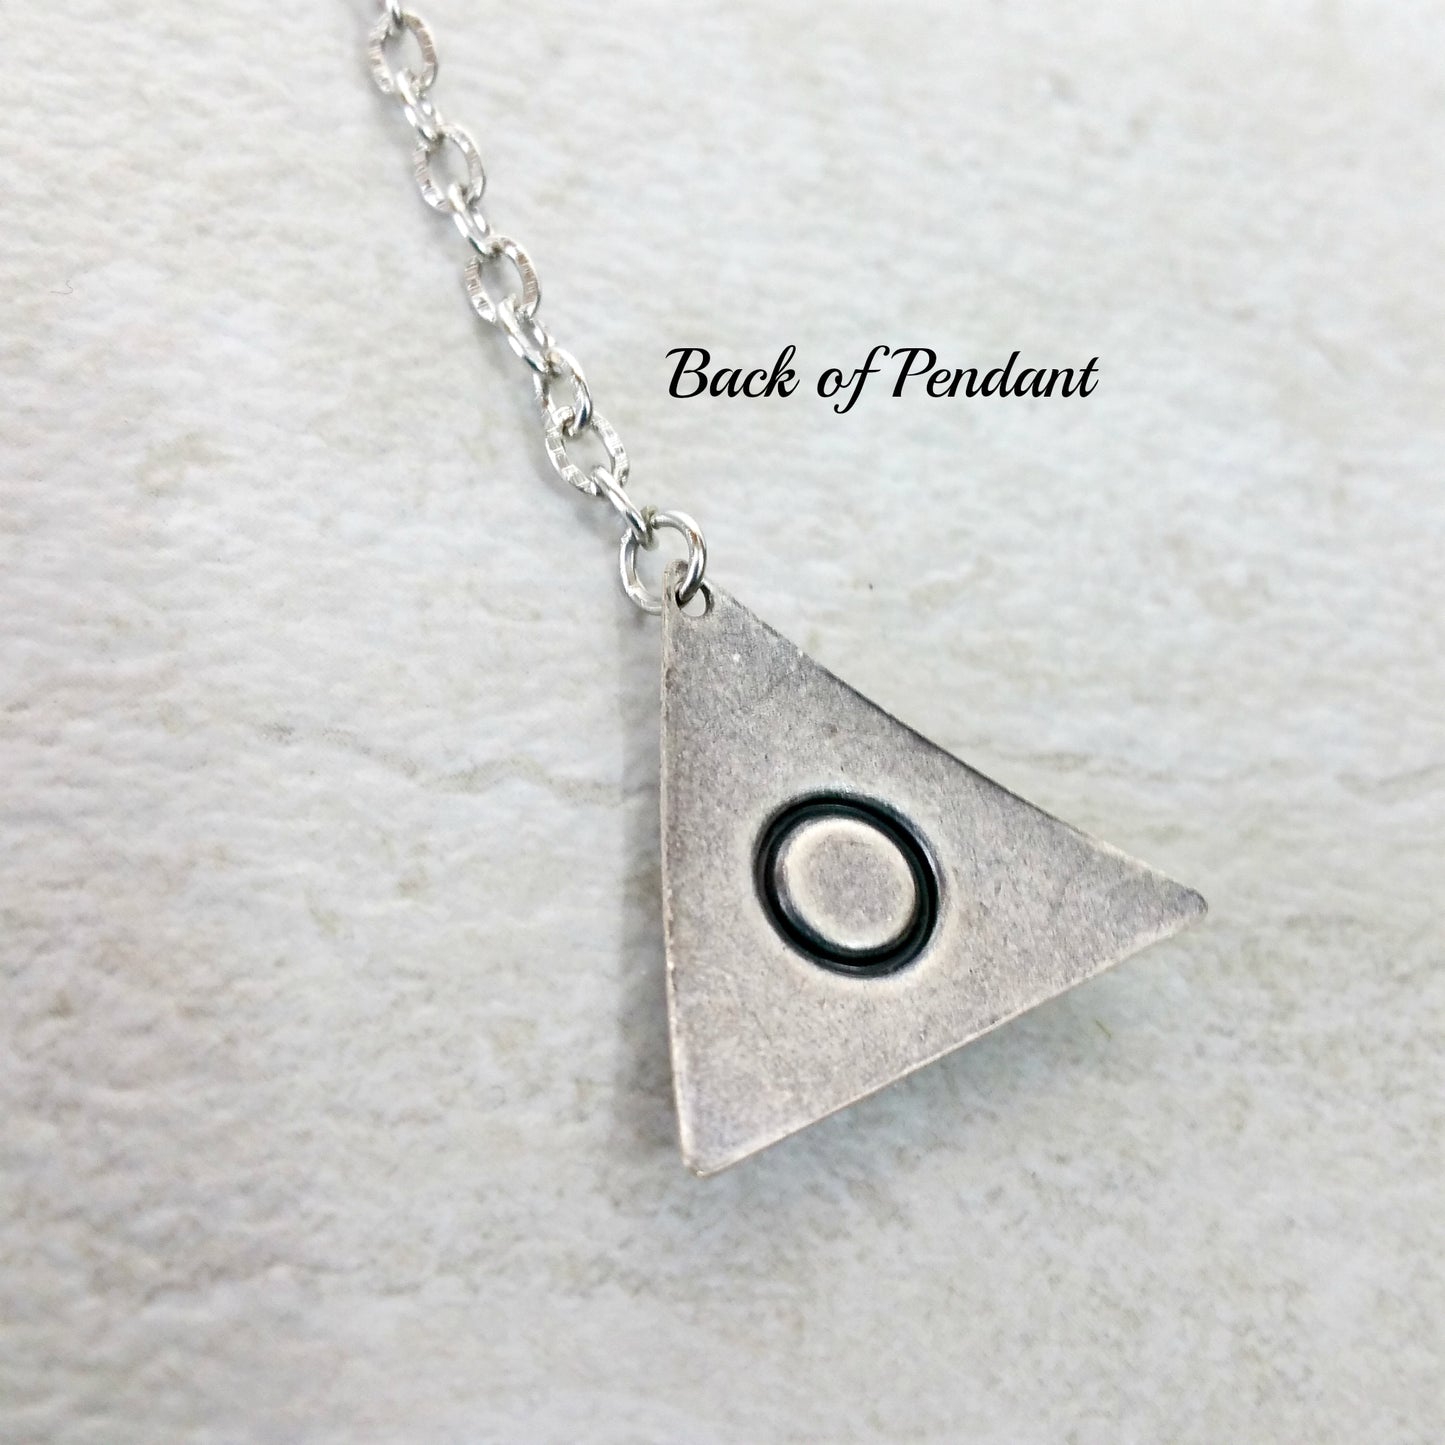 Edgy Silver Y Necklace, Geometric Triangle Pendant, Womens Gift for Her